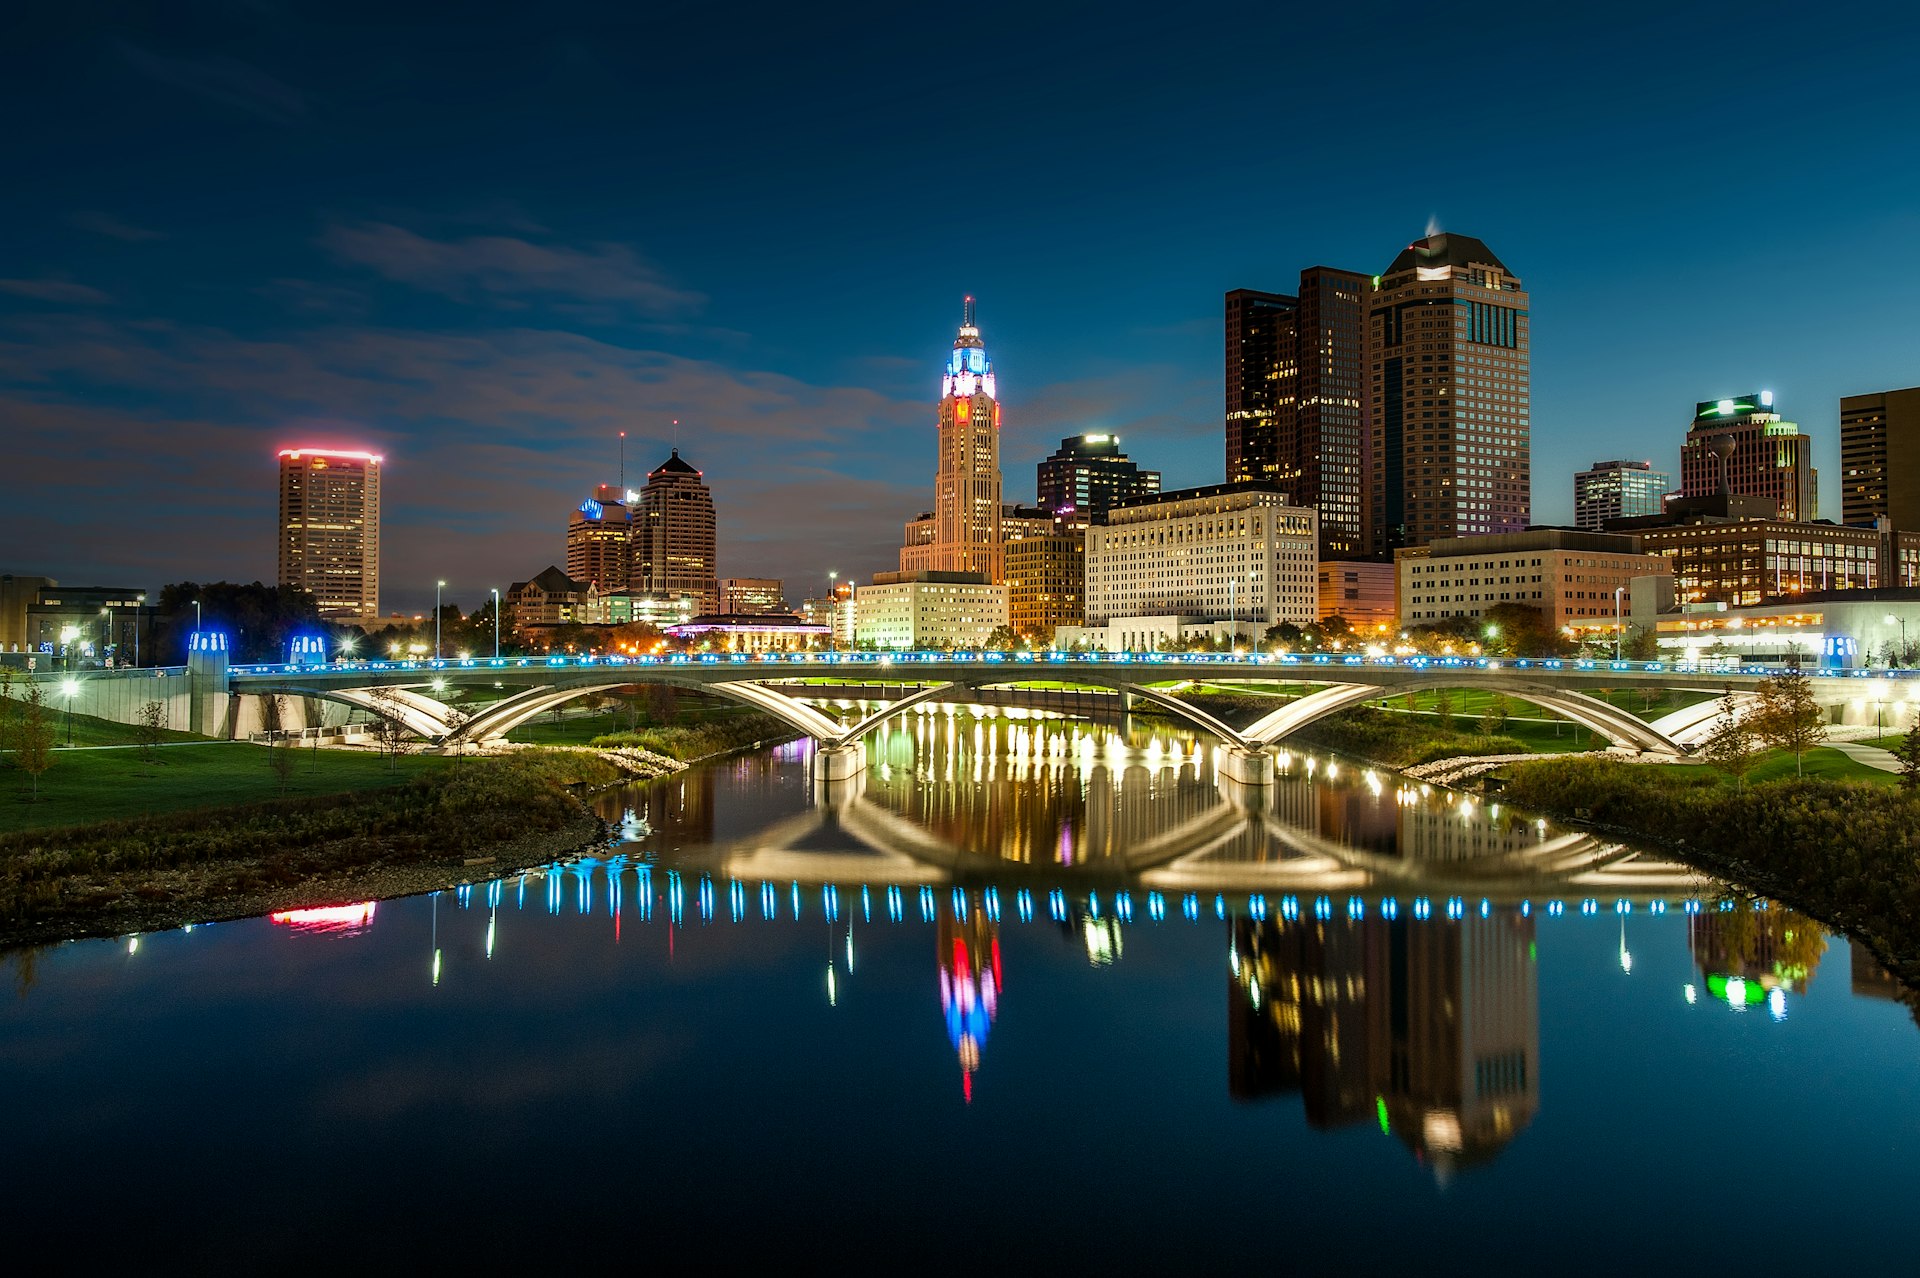 The bright city lights of downtown Columbus is mirrored in a body of water under flowing under a stone bridge; Columbus vs AnnArbor 